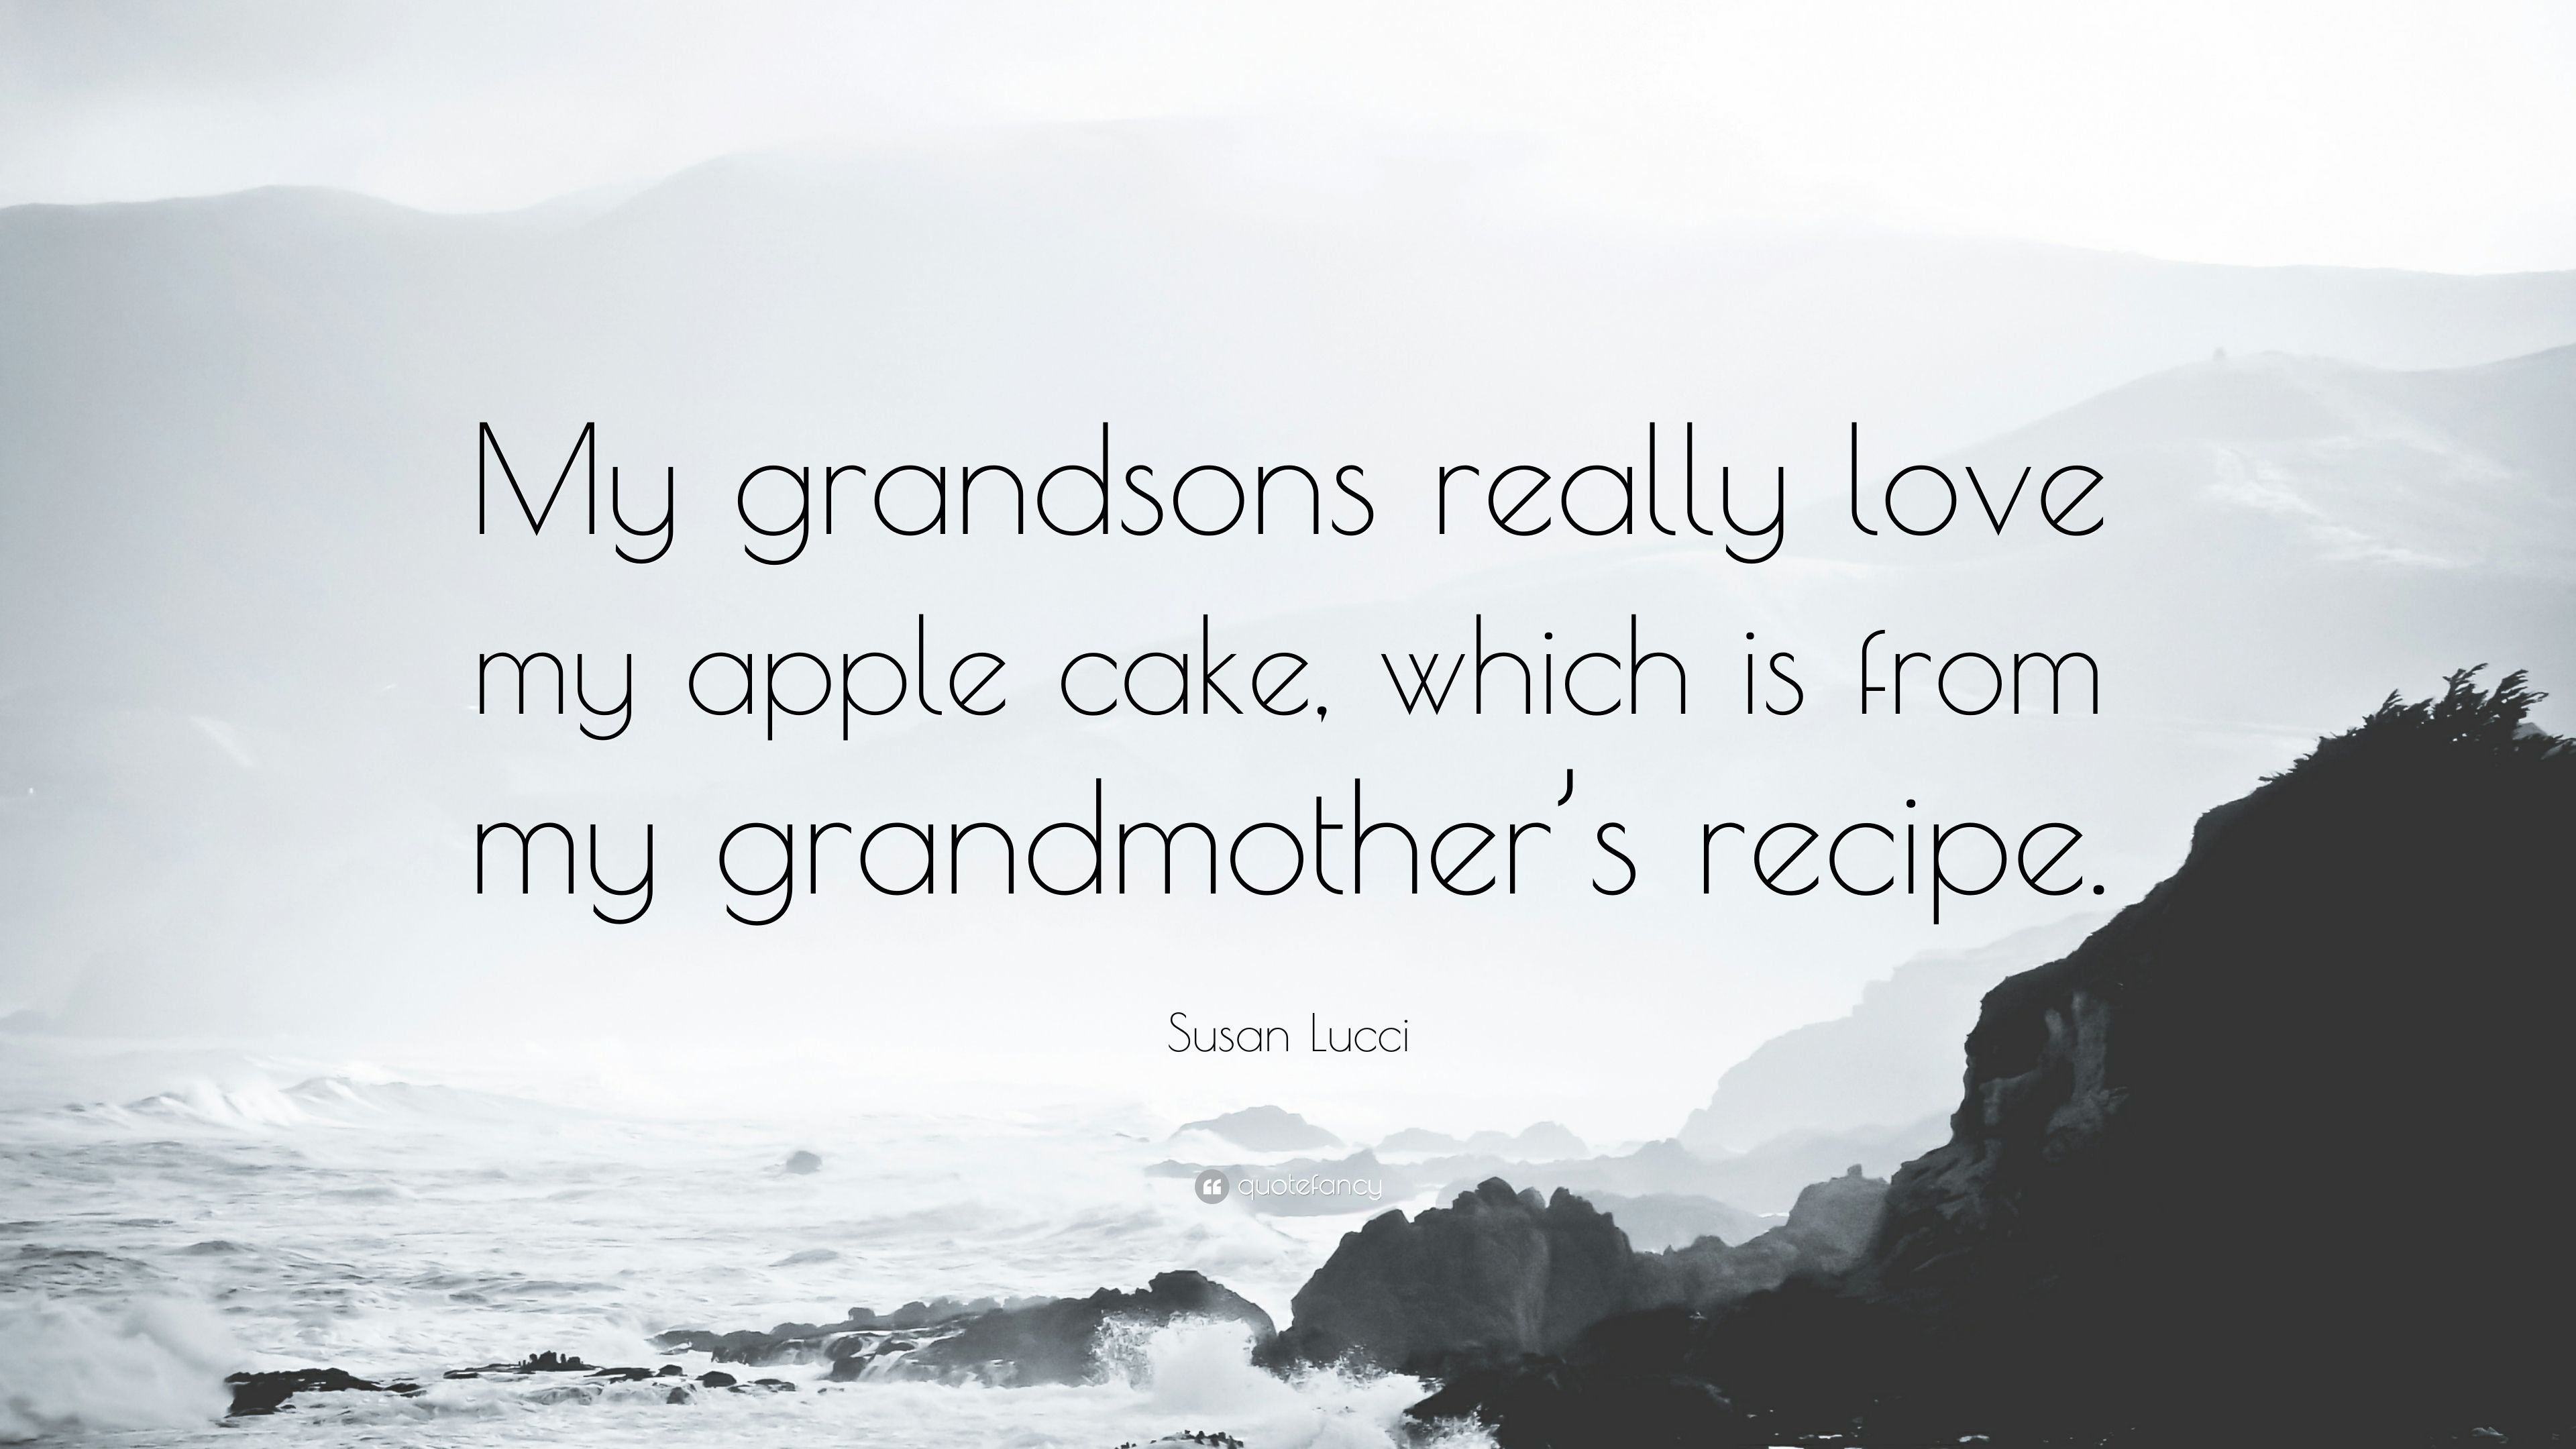 Susan Lucci Quote: “My grandsons really love my apple cake, which